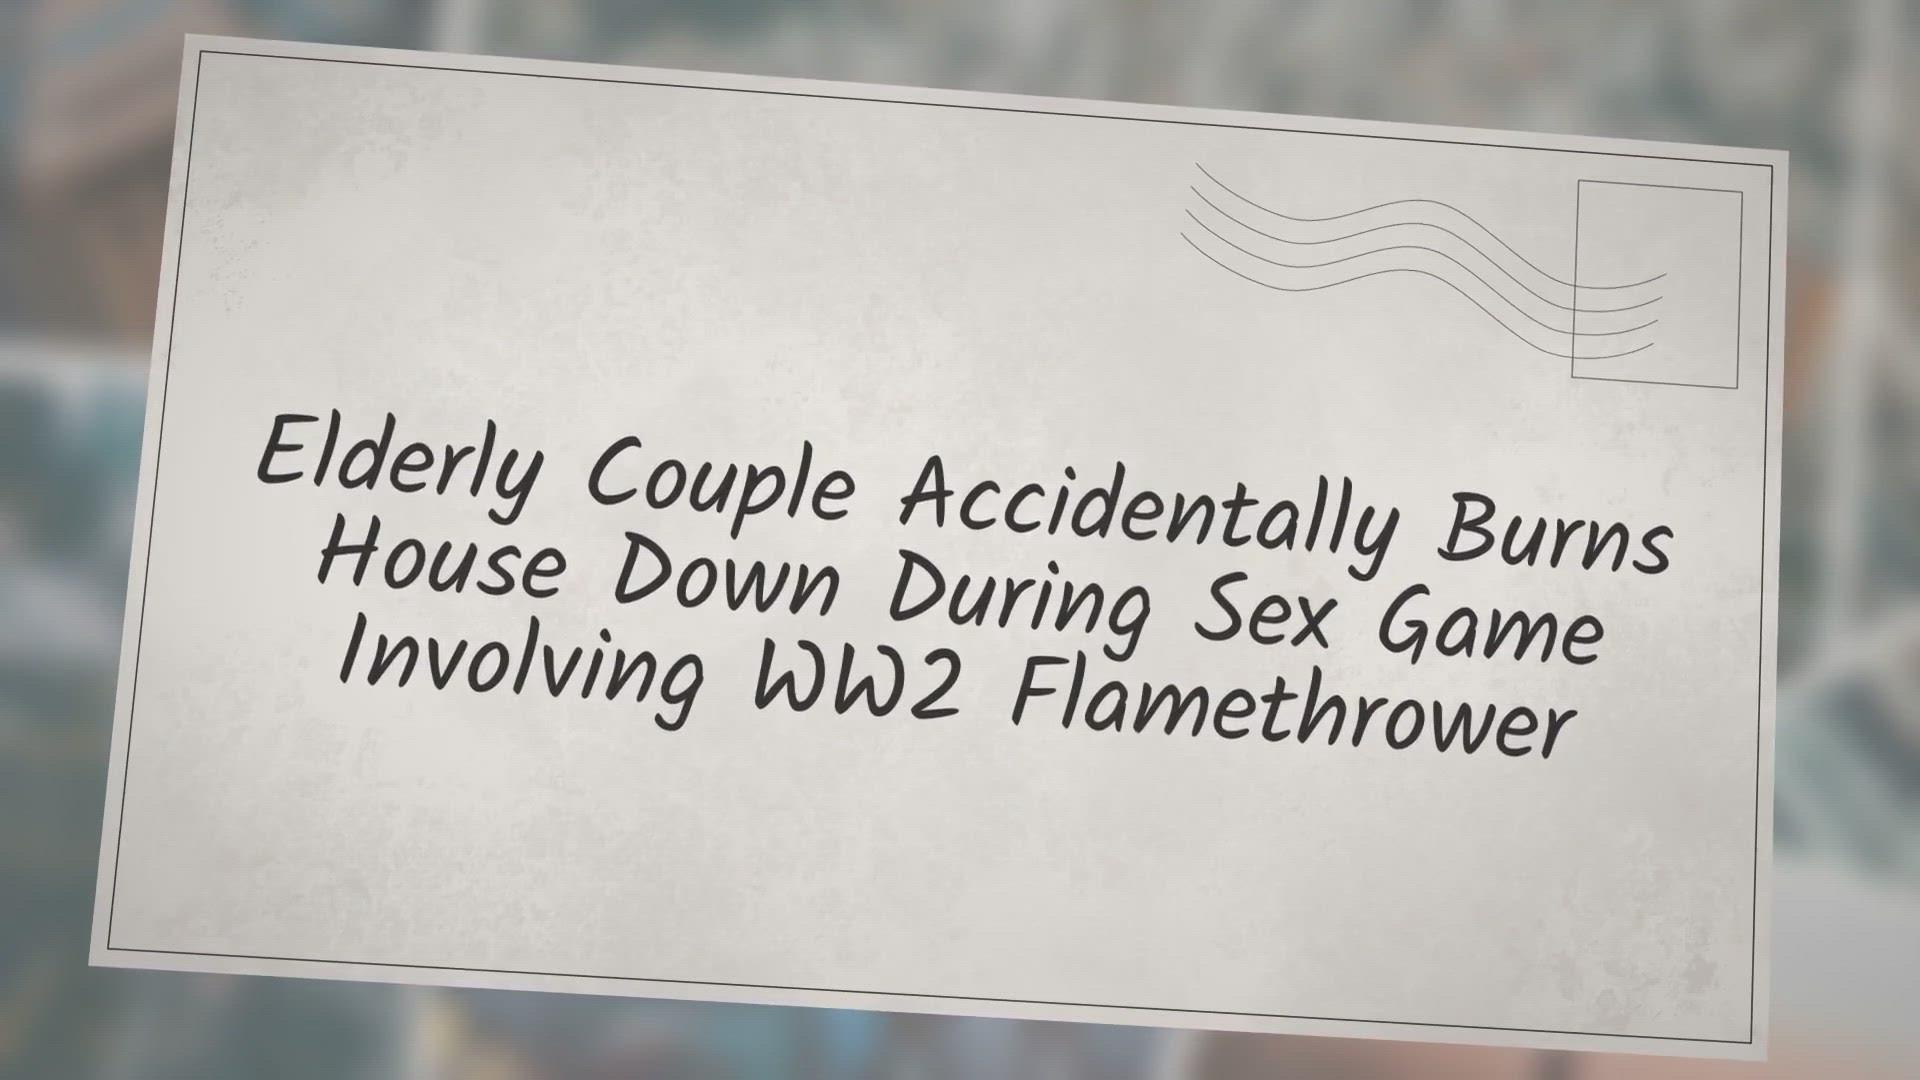 'Video thumbnail for ‘Elderly Couple Accidentally Burns House Down During Sex Game Involving WW2 Flamethrower’'